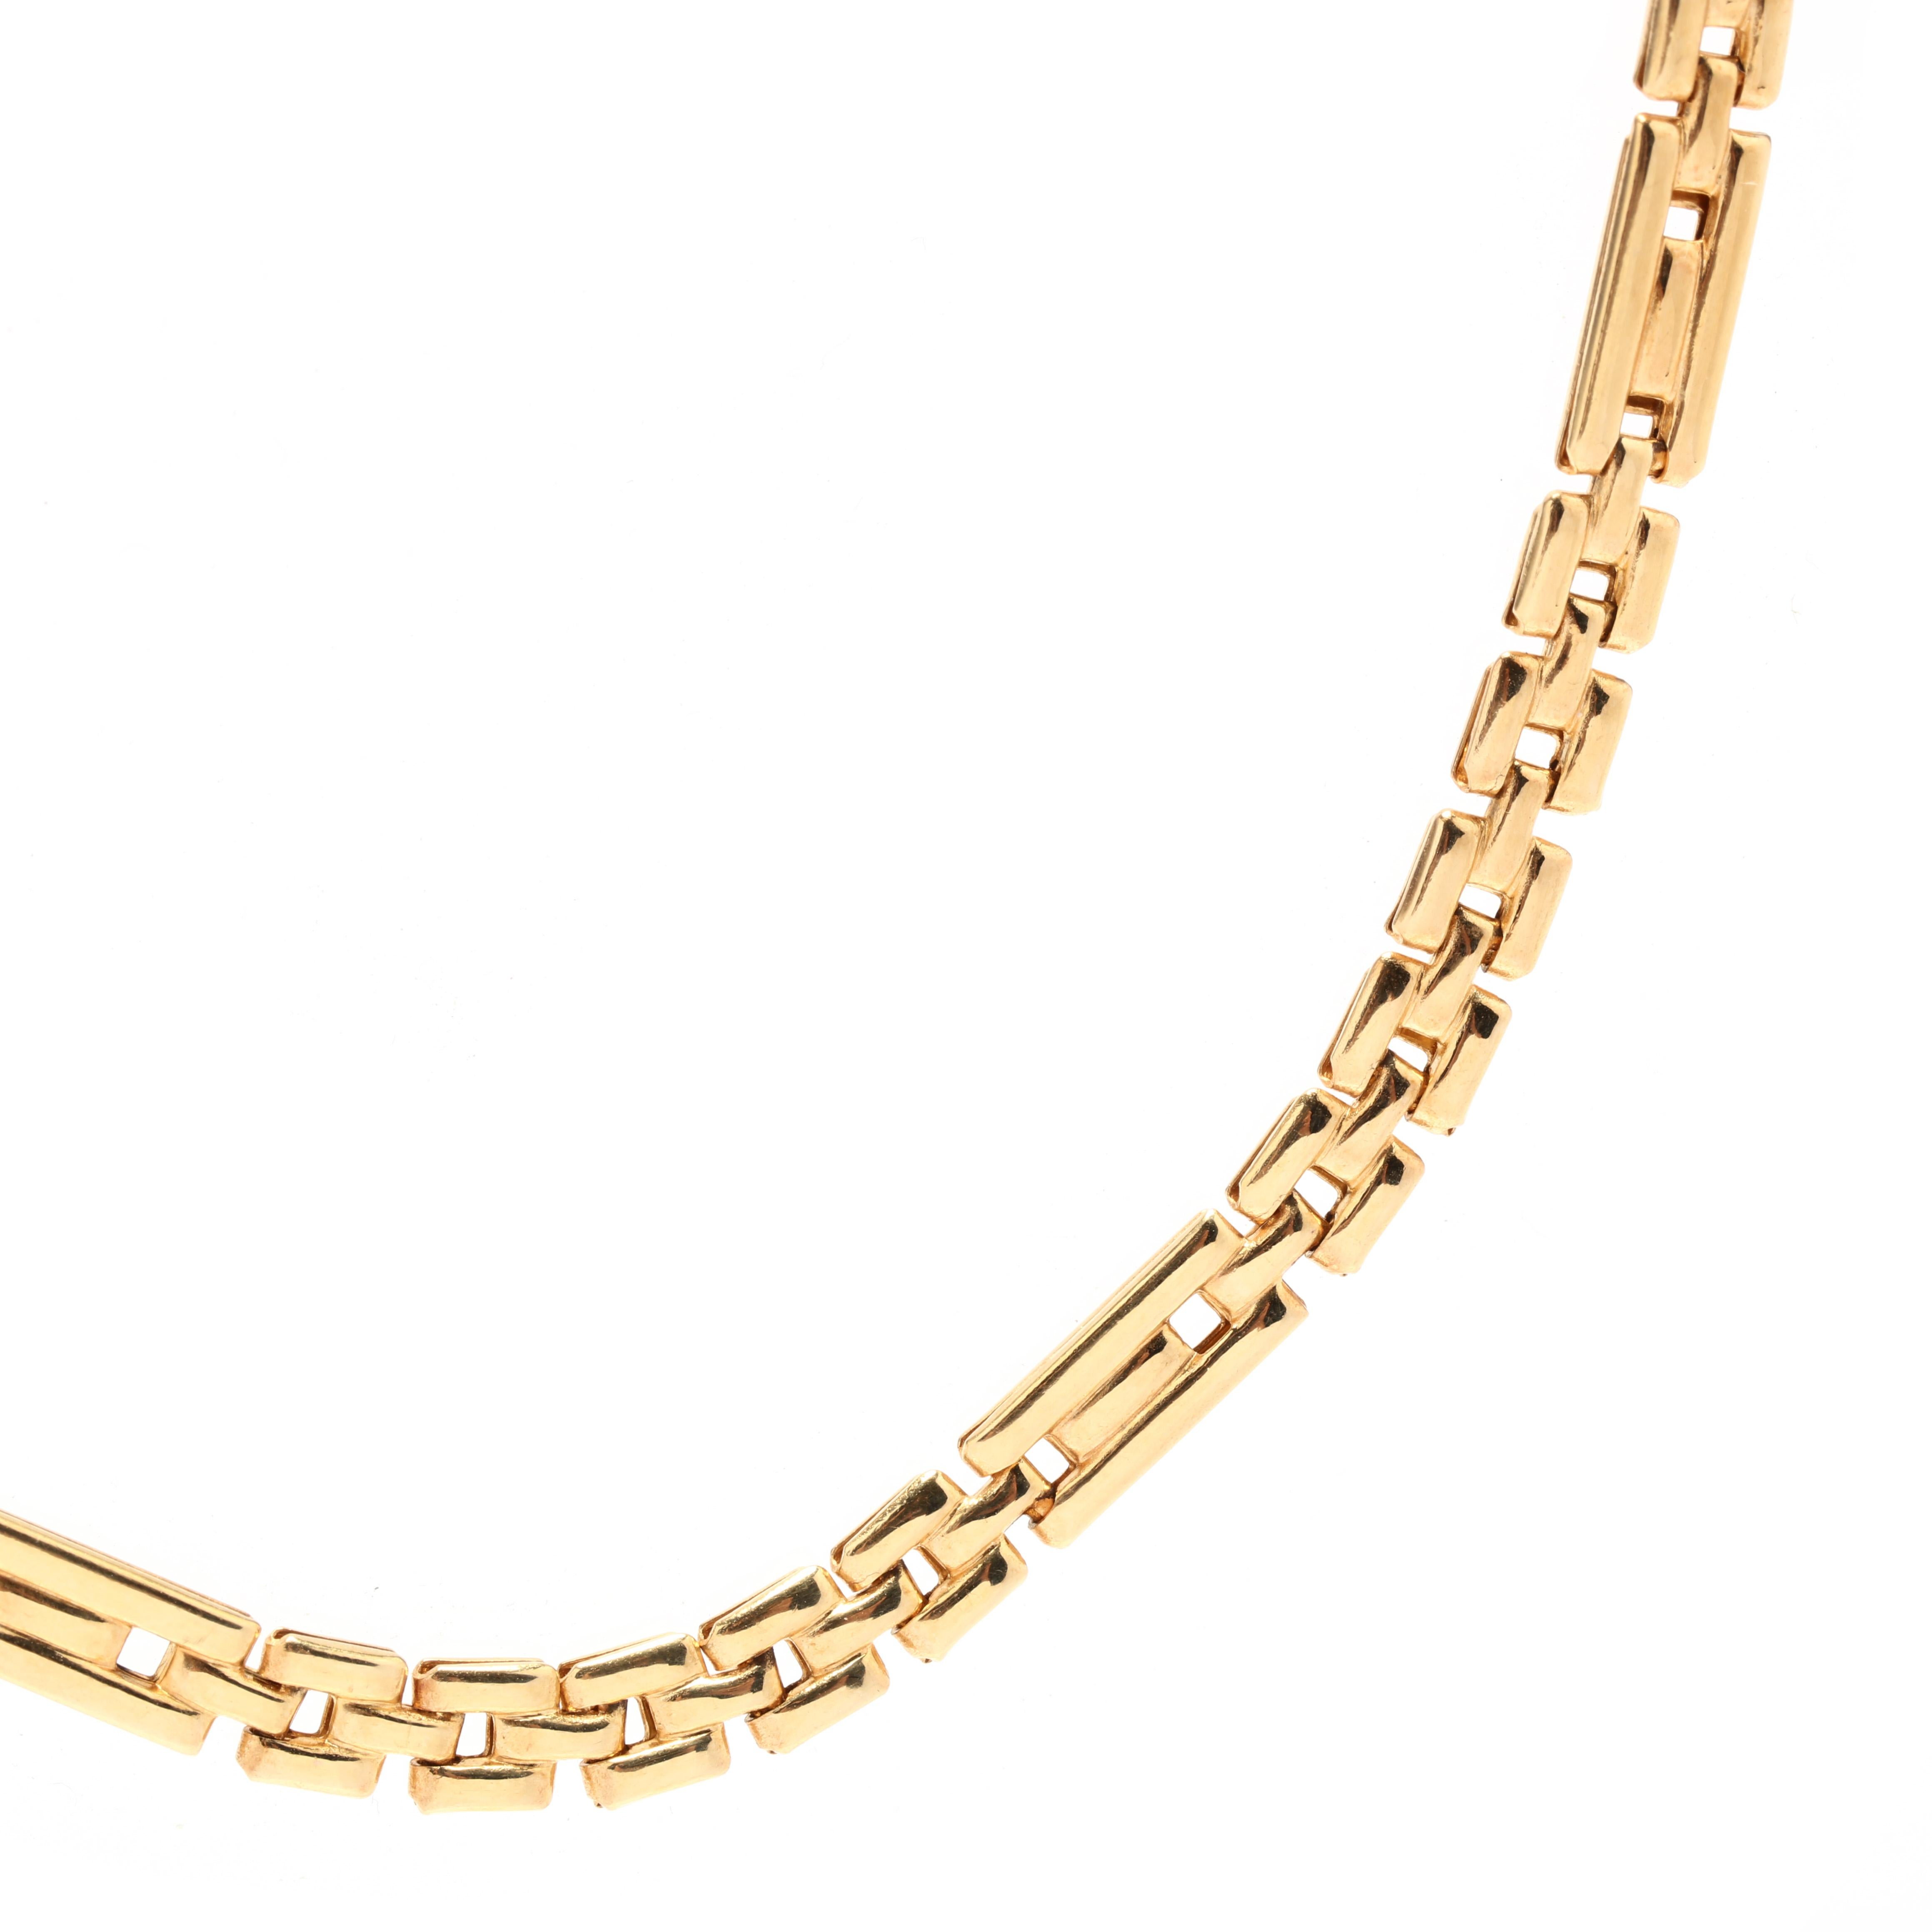 A vintage 18 karat yellow Italian gold flat panther link chain necklace. This simple necklace features a flat design of alternating short and long rectangular links and with a lobster clasp.

Length: 17 in.

Width: 4.2 mm

Weight: 7.8 dwts. / 12.13